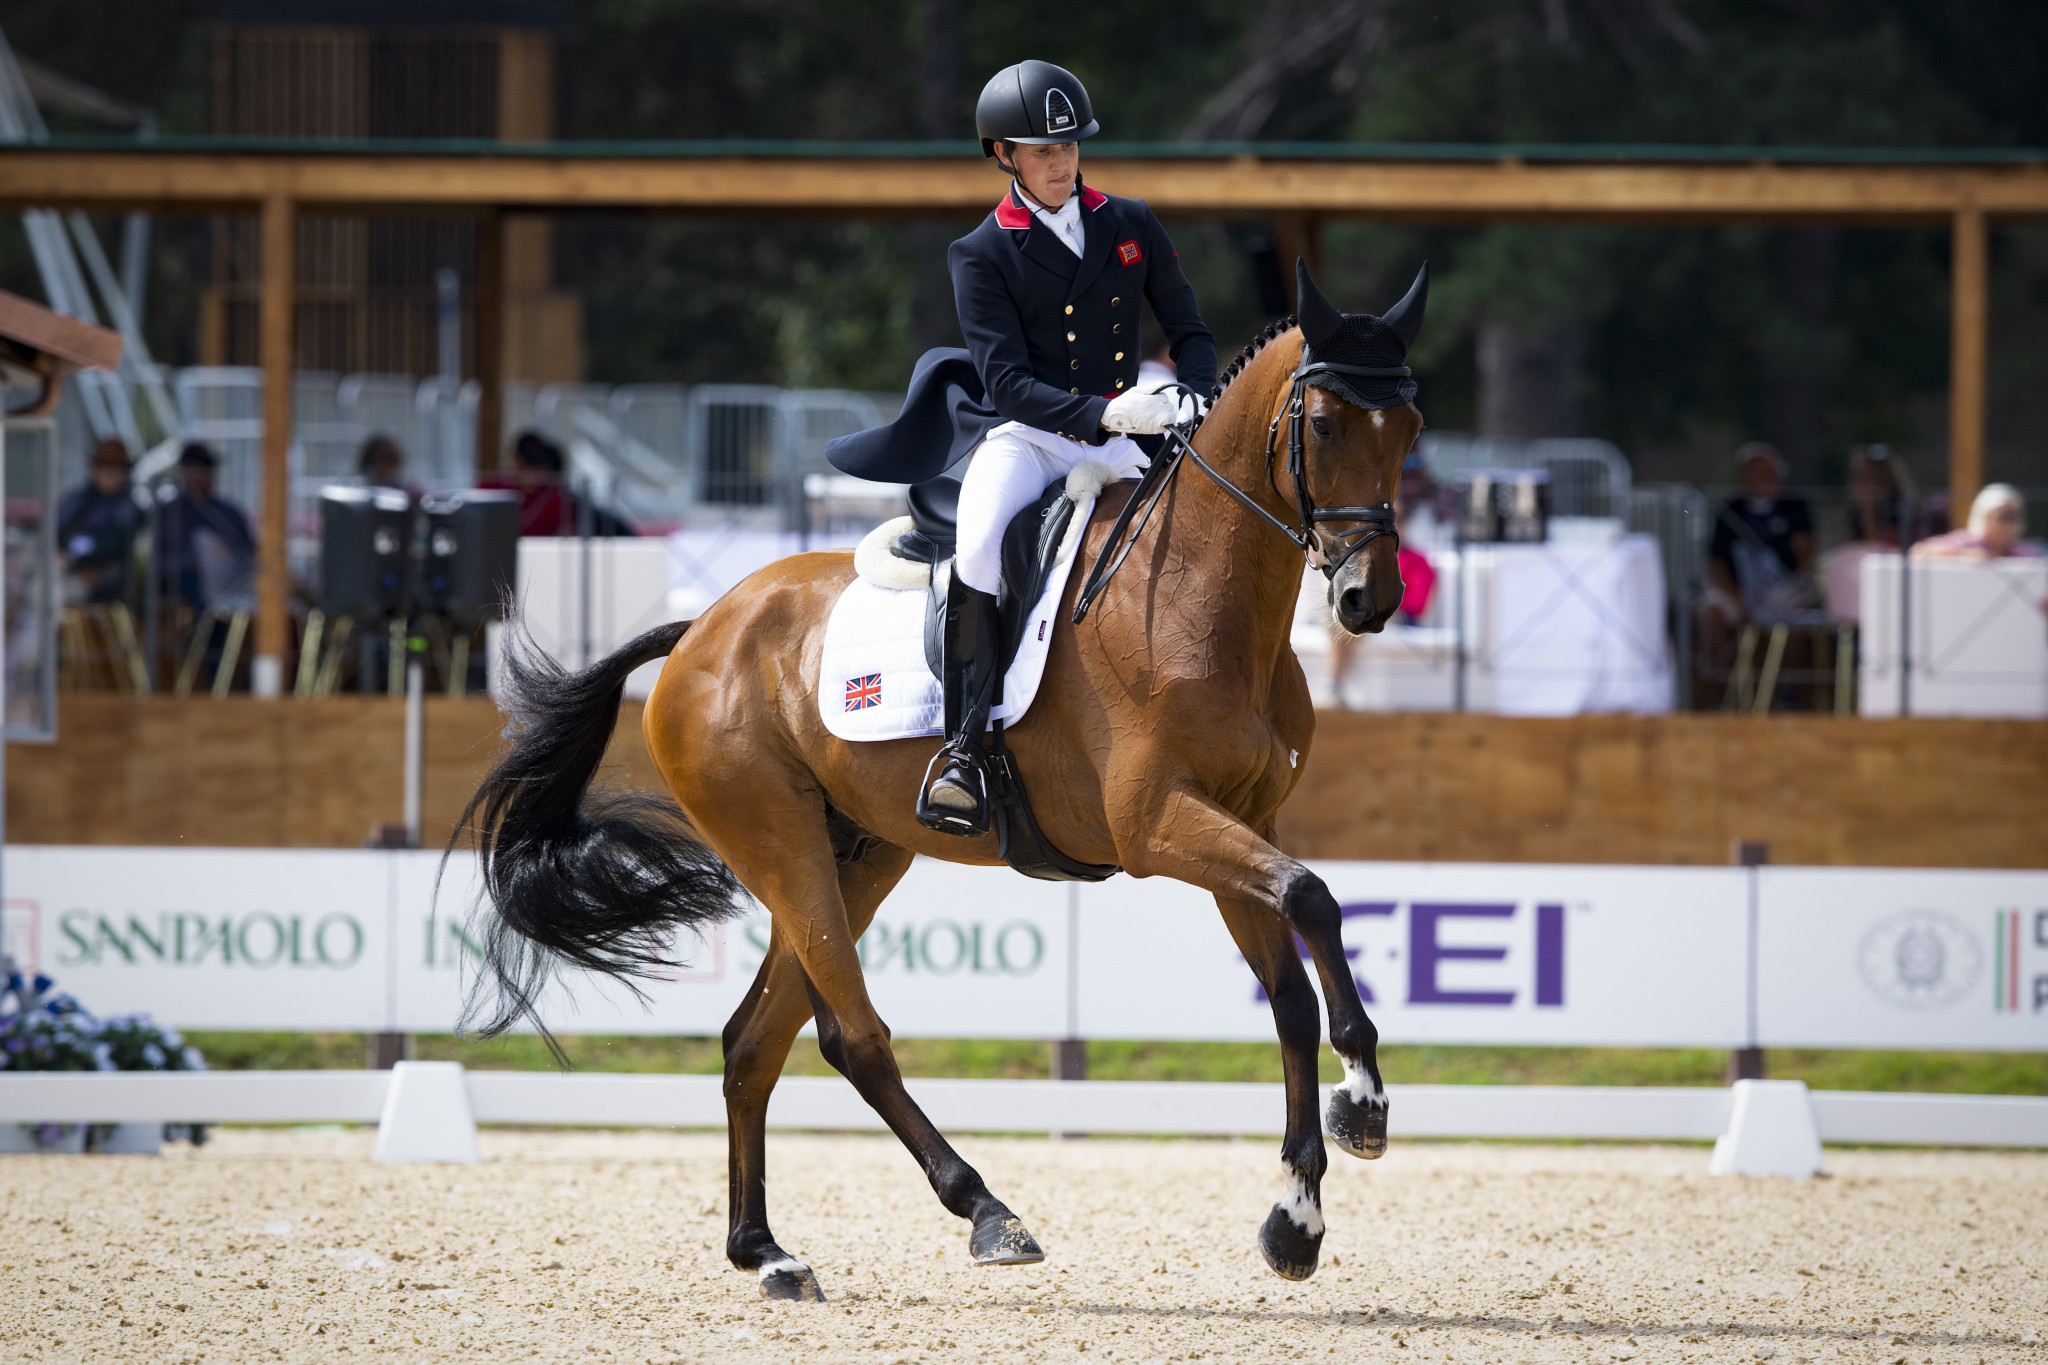 Britain set record dressage score at FEI World Eventing Championships